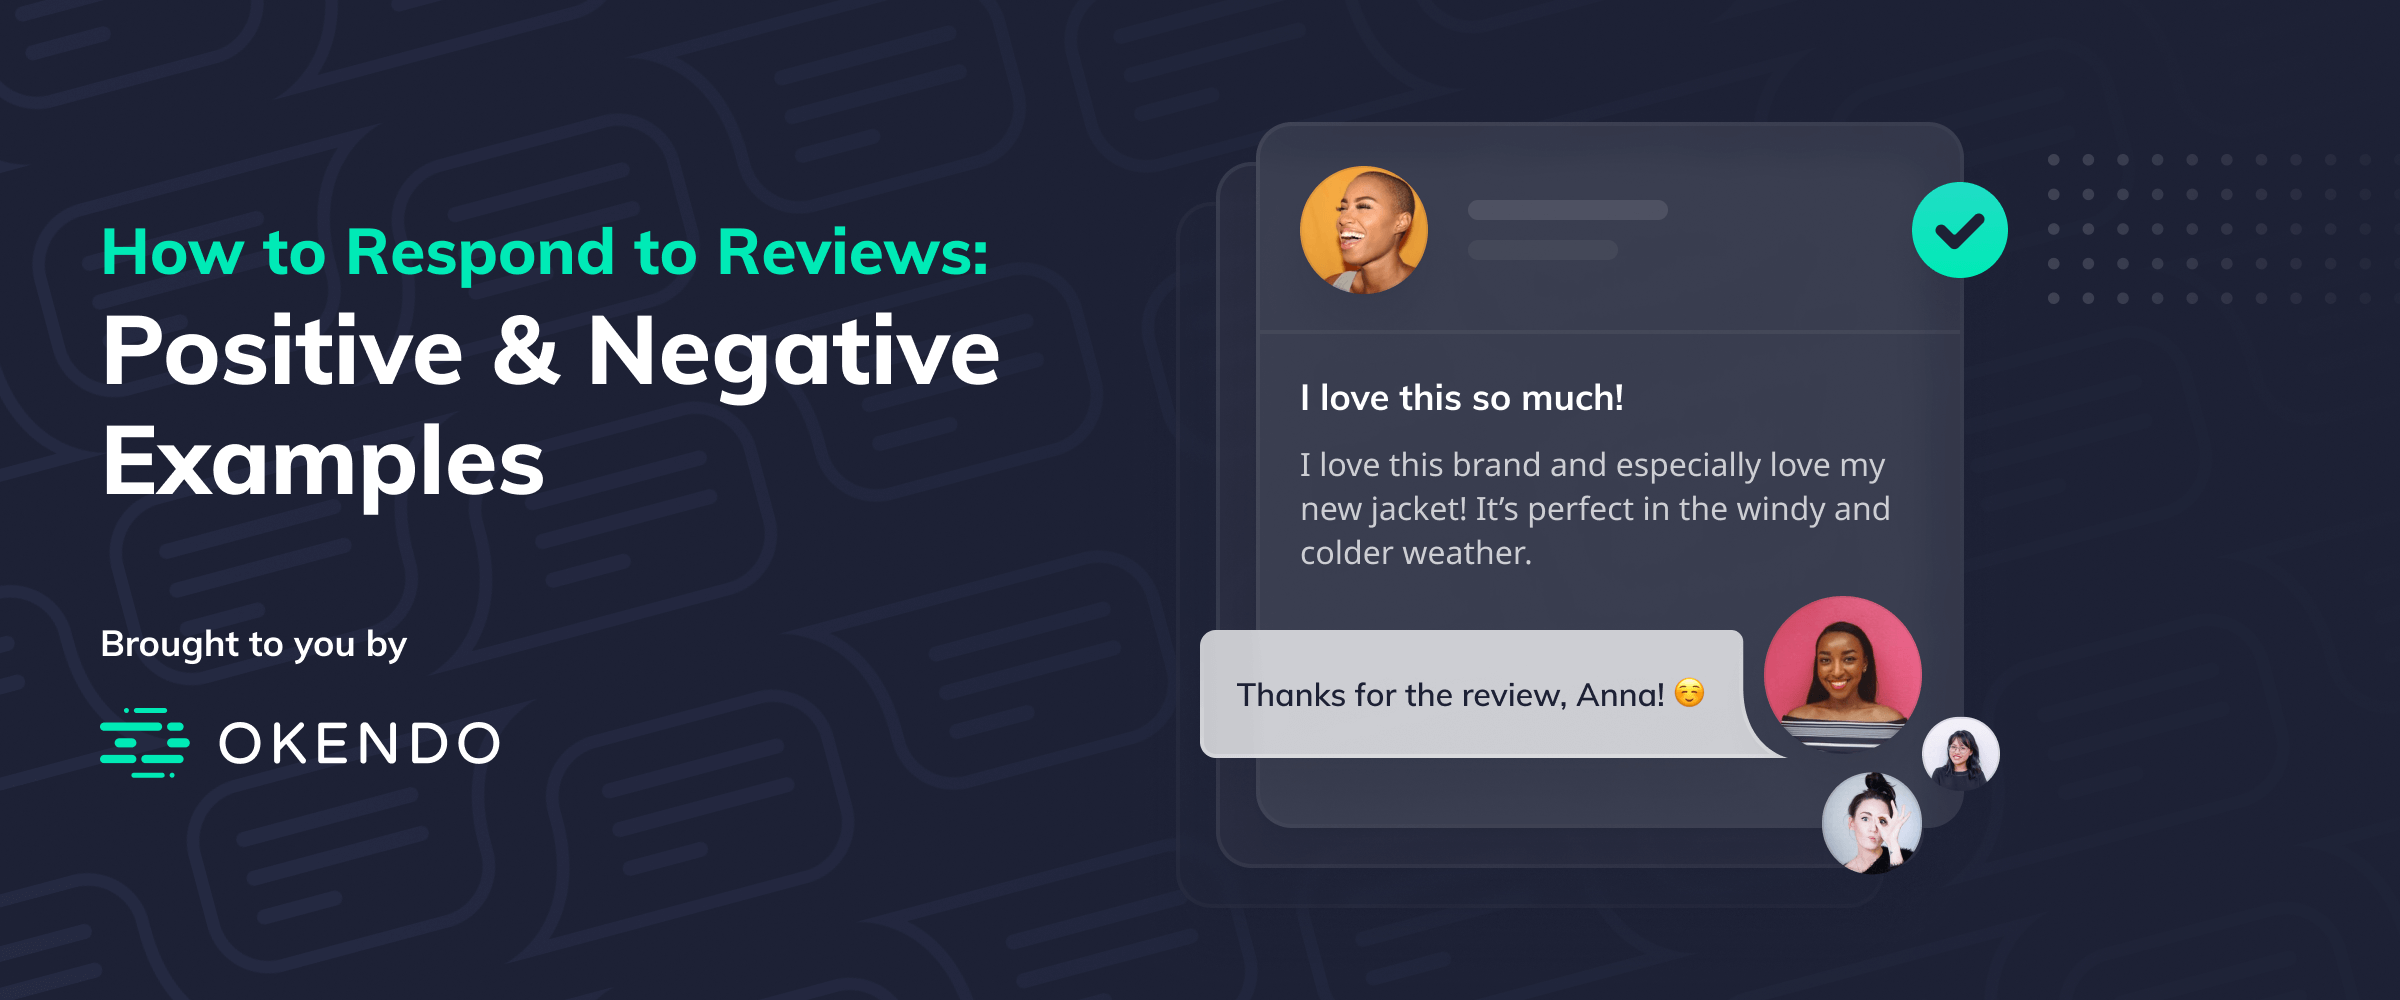 How to Respond to Reviews: Positive & Negative Examples